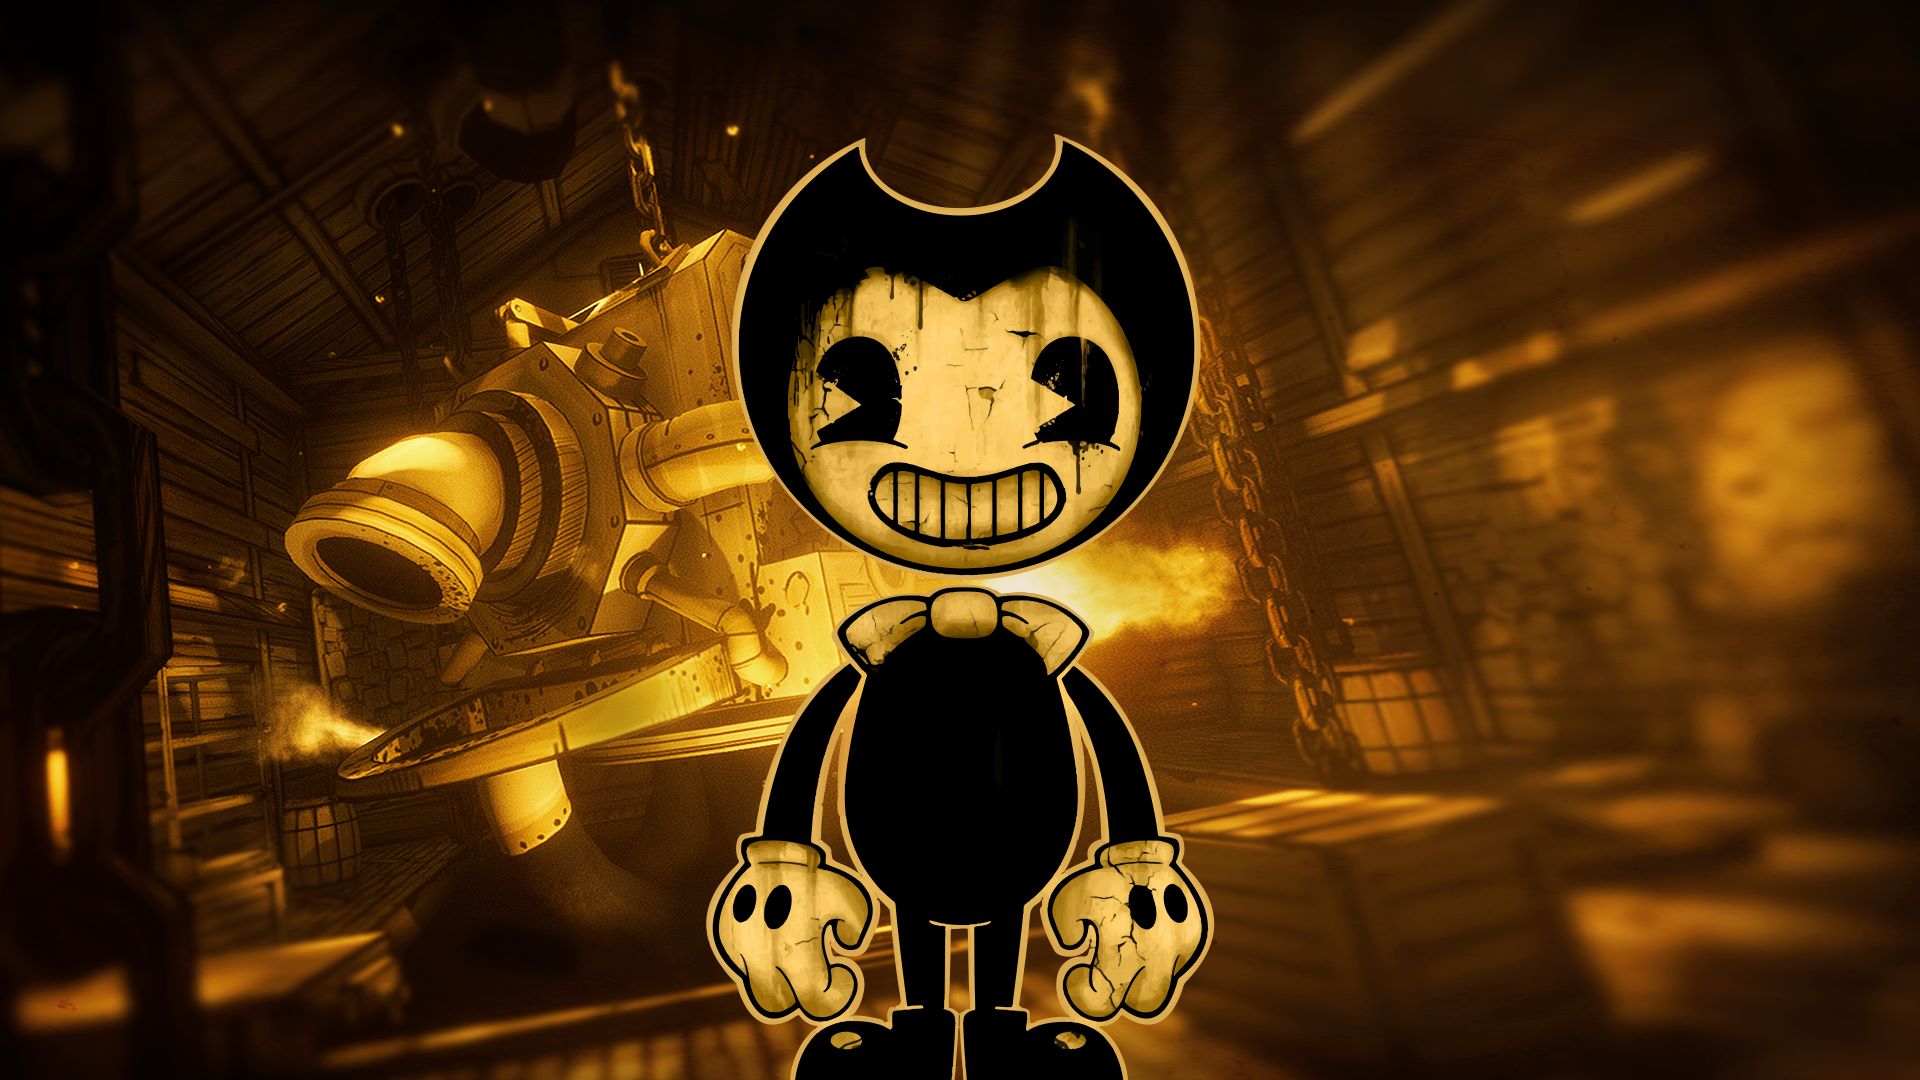 Video Game Bendy and the Ink Machine HD Wallpaper by Eric Proctor